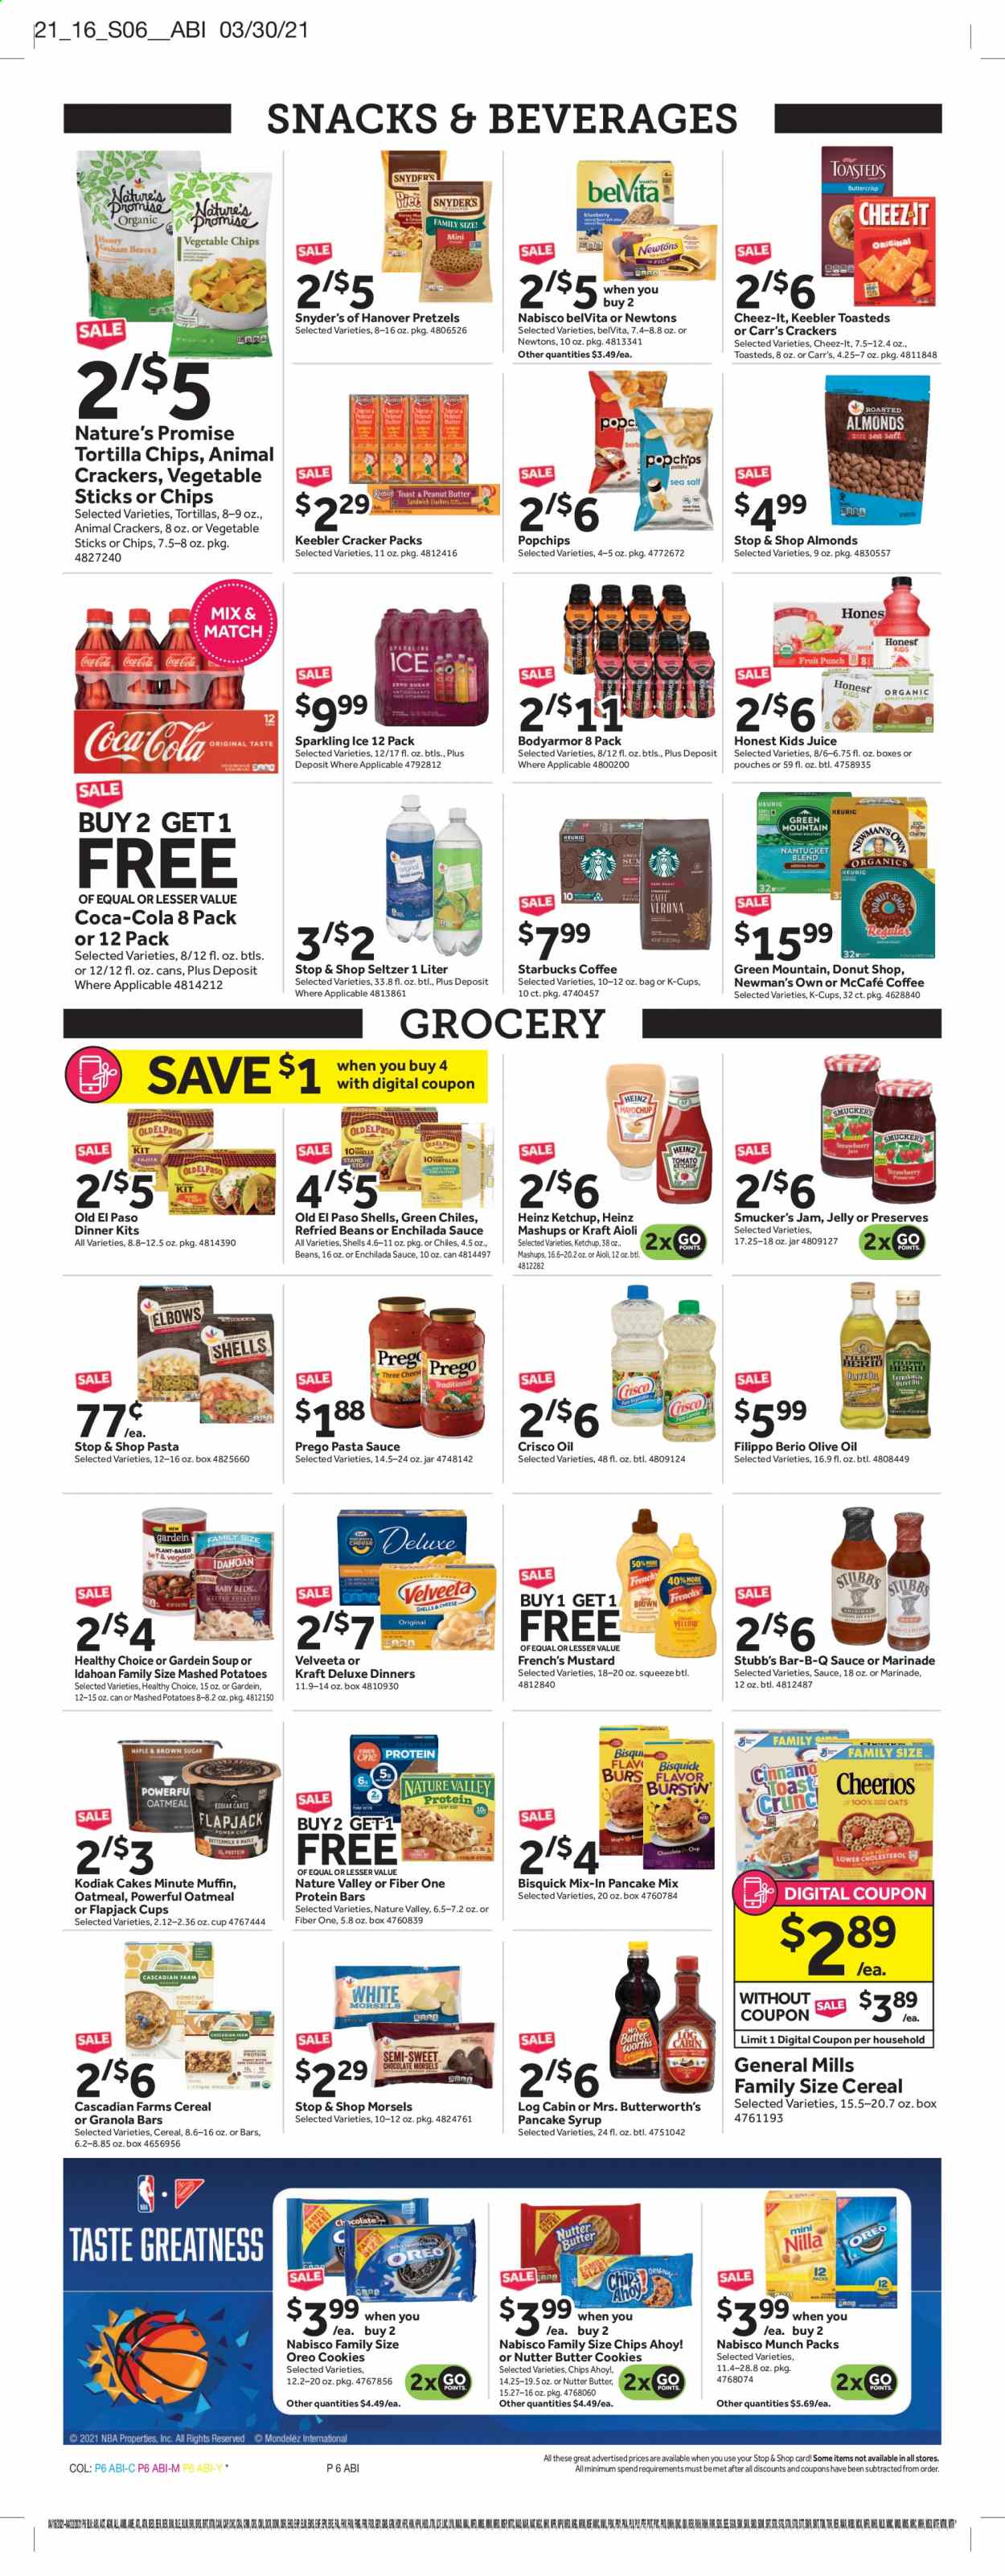 thumbnail - Stop & Shop Flyer - 04/16/2021 - 04/22/2021 - Sales products - pretzels, cake, Old El Paso, Nature’s Promise, muffin, mashed potatoes, pasta sauce, soup, dinner kit, Healthy Choice, Kraft®, Oreo, cookies, chocolate, butter cookies, snack, jelly, crackers, Chips Ahoy!, Keebler, tortilla chips, chips, vegetable chips, Cheez-It, Bisquick, Crisco, oatmeal, enchilada sauce, refried beans, Heinz, cereals, Cheerios, protein bar, granola bar, belVita, Nature Valley, Fiber One, mustard, ketchup, marinade, olive oil, oil, fruit jam, peanut butter, pancake syrup, syrup, almonds, Coca-Cola, juice, seltzer water, coffee, Starbucks, coffee capsules, McCafe, K-Cups, Green Mountain. Page 5.